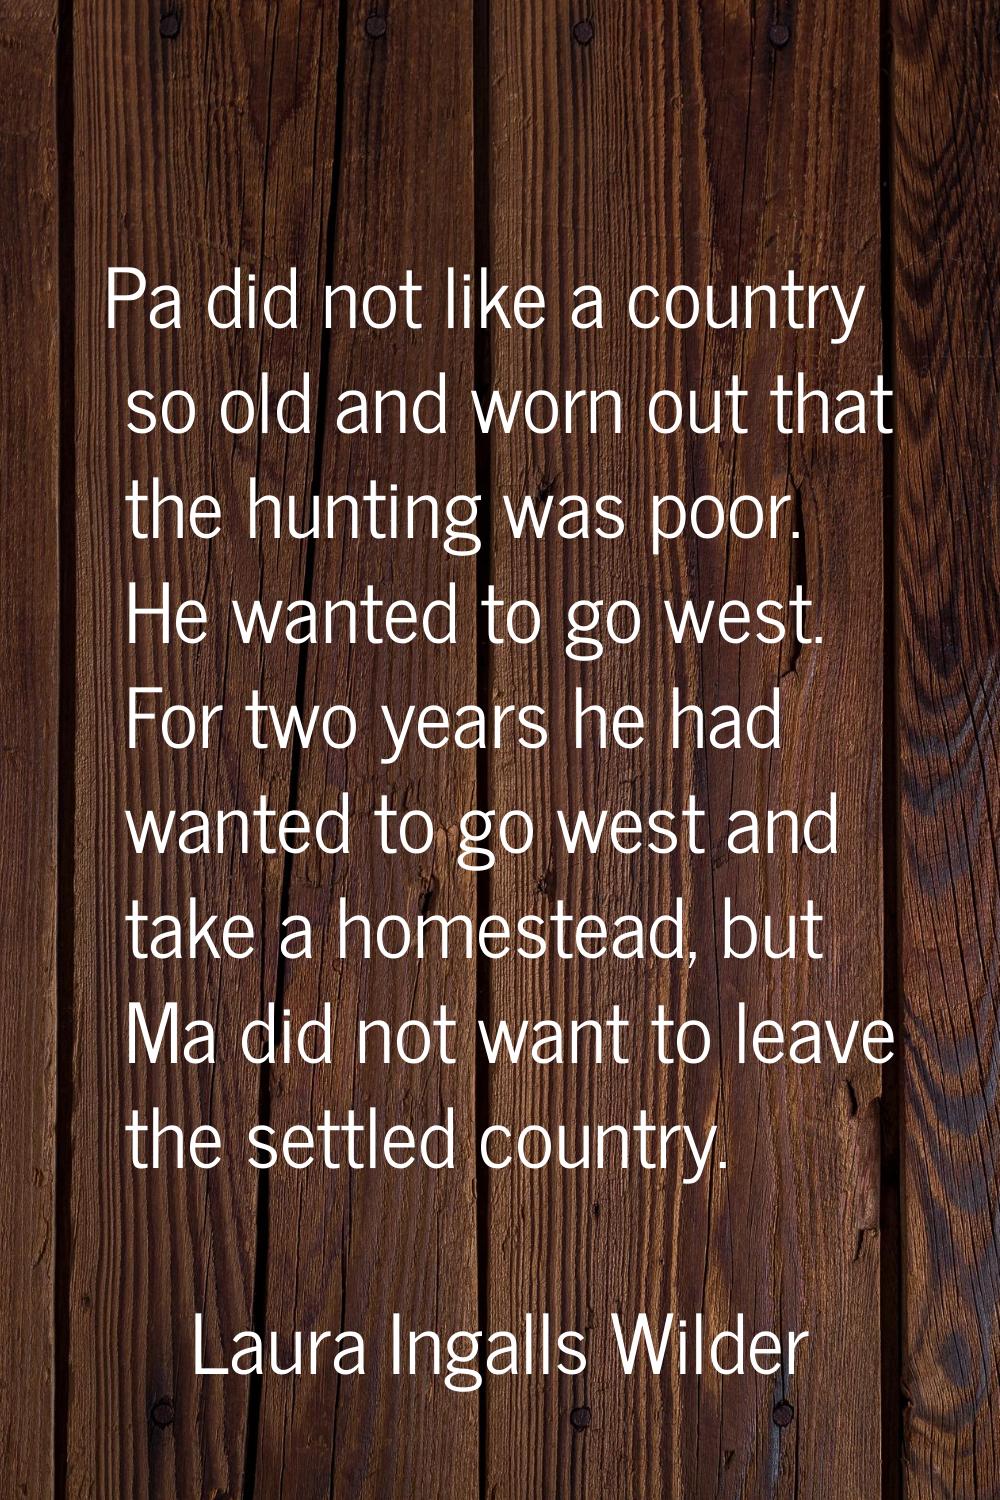 Pa did not like a country so old and worn out that the hunting was poor. He wanted to go west. For 